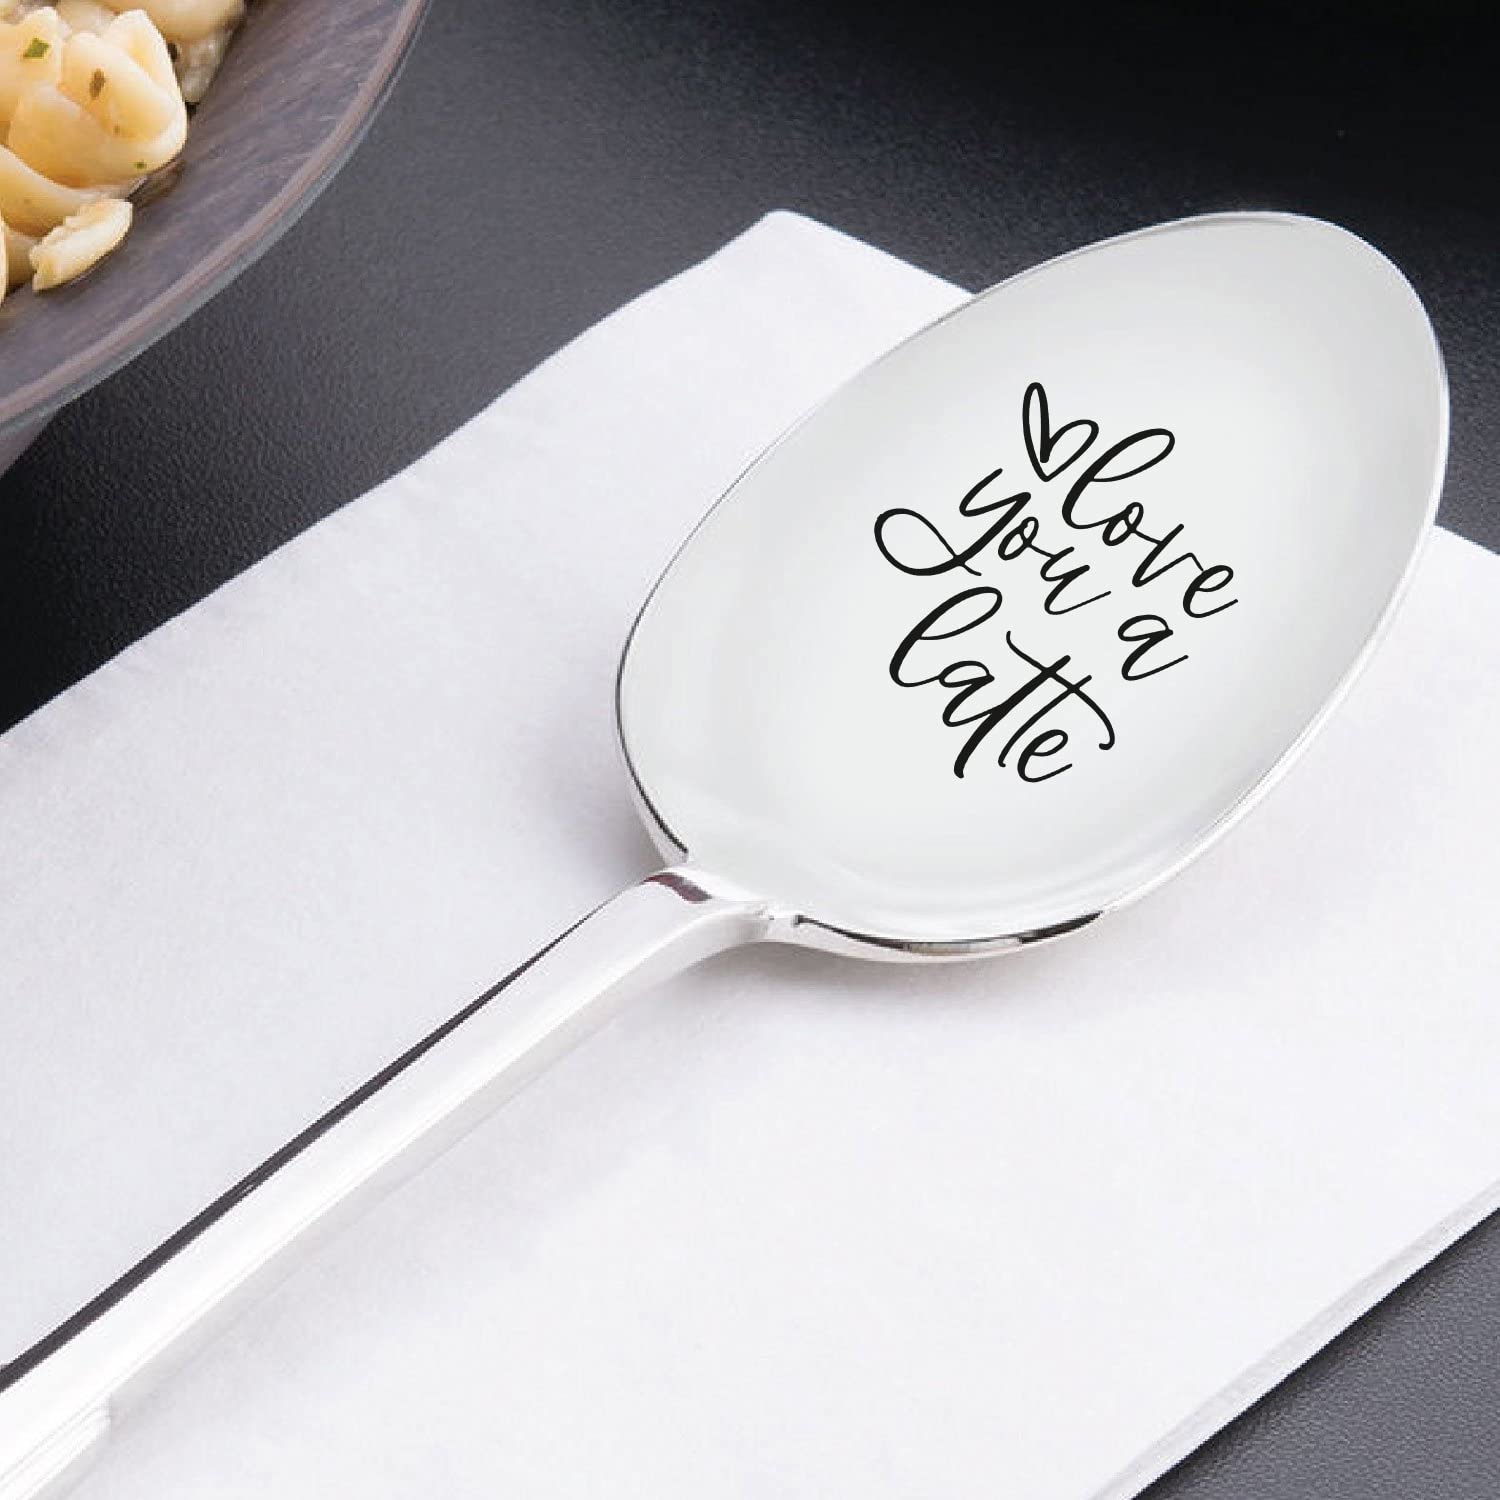 TyM Love you a latte Engraved Stainless Steel spoon for coffee tea cereal ice cream - Engraved gift for him/her - 7 inch Sturdy handle and food safe engraving